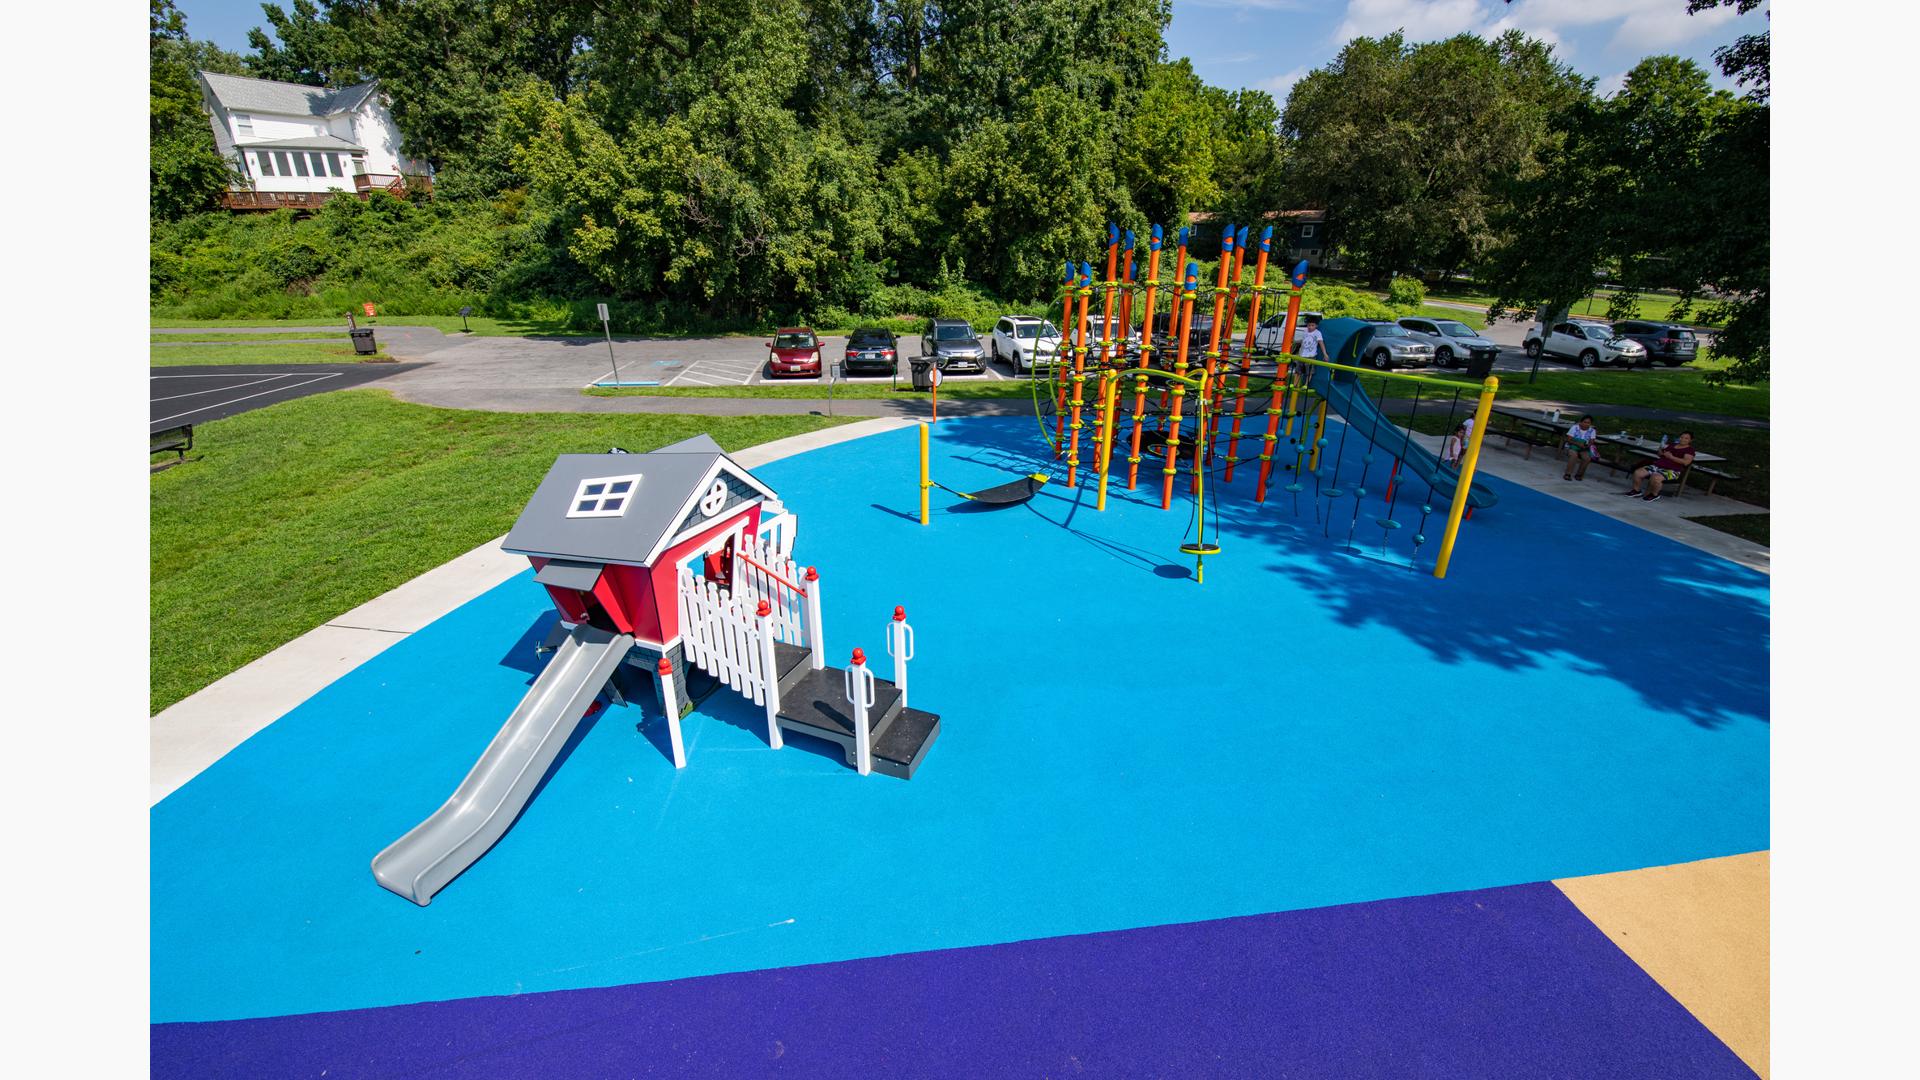 Orange dynamic rope structure is nested in neighborhood park with red playhouse for younger kids all with blue poured-in-place playground surface. 